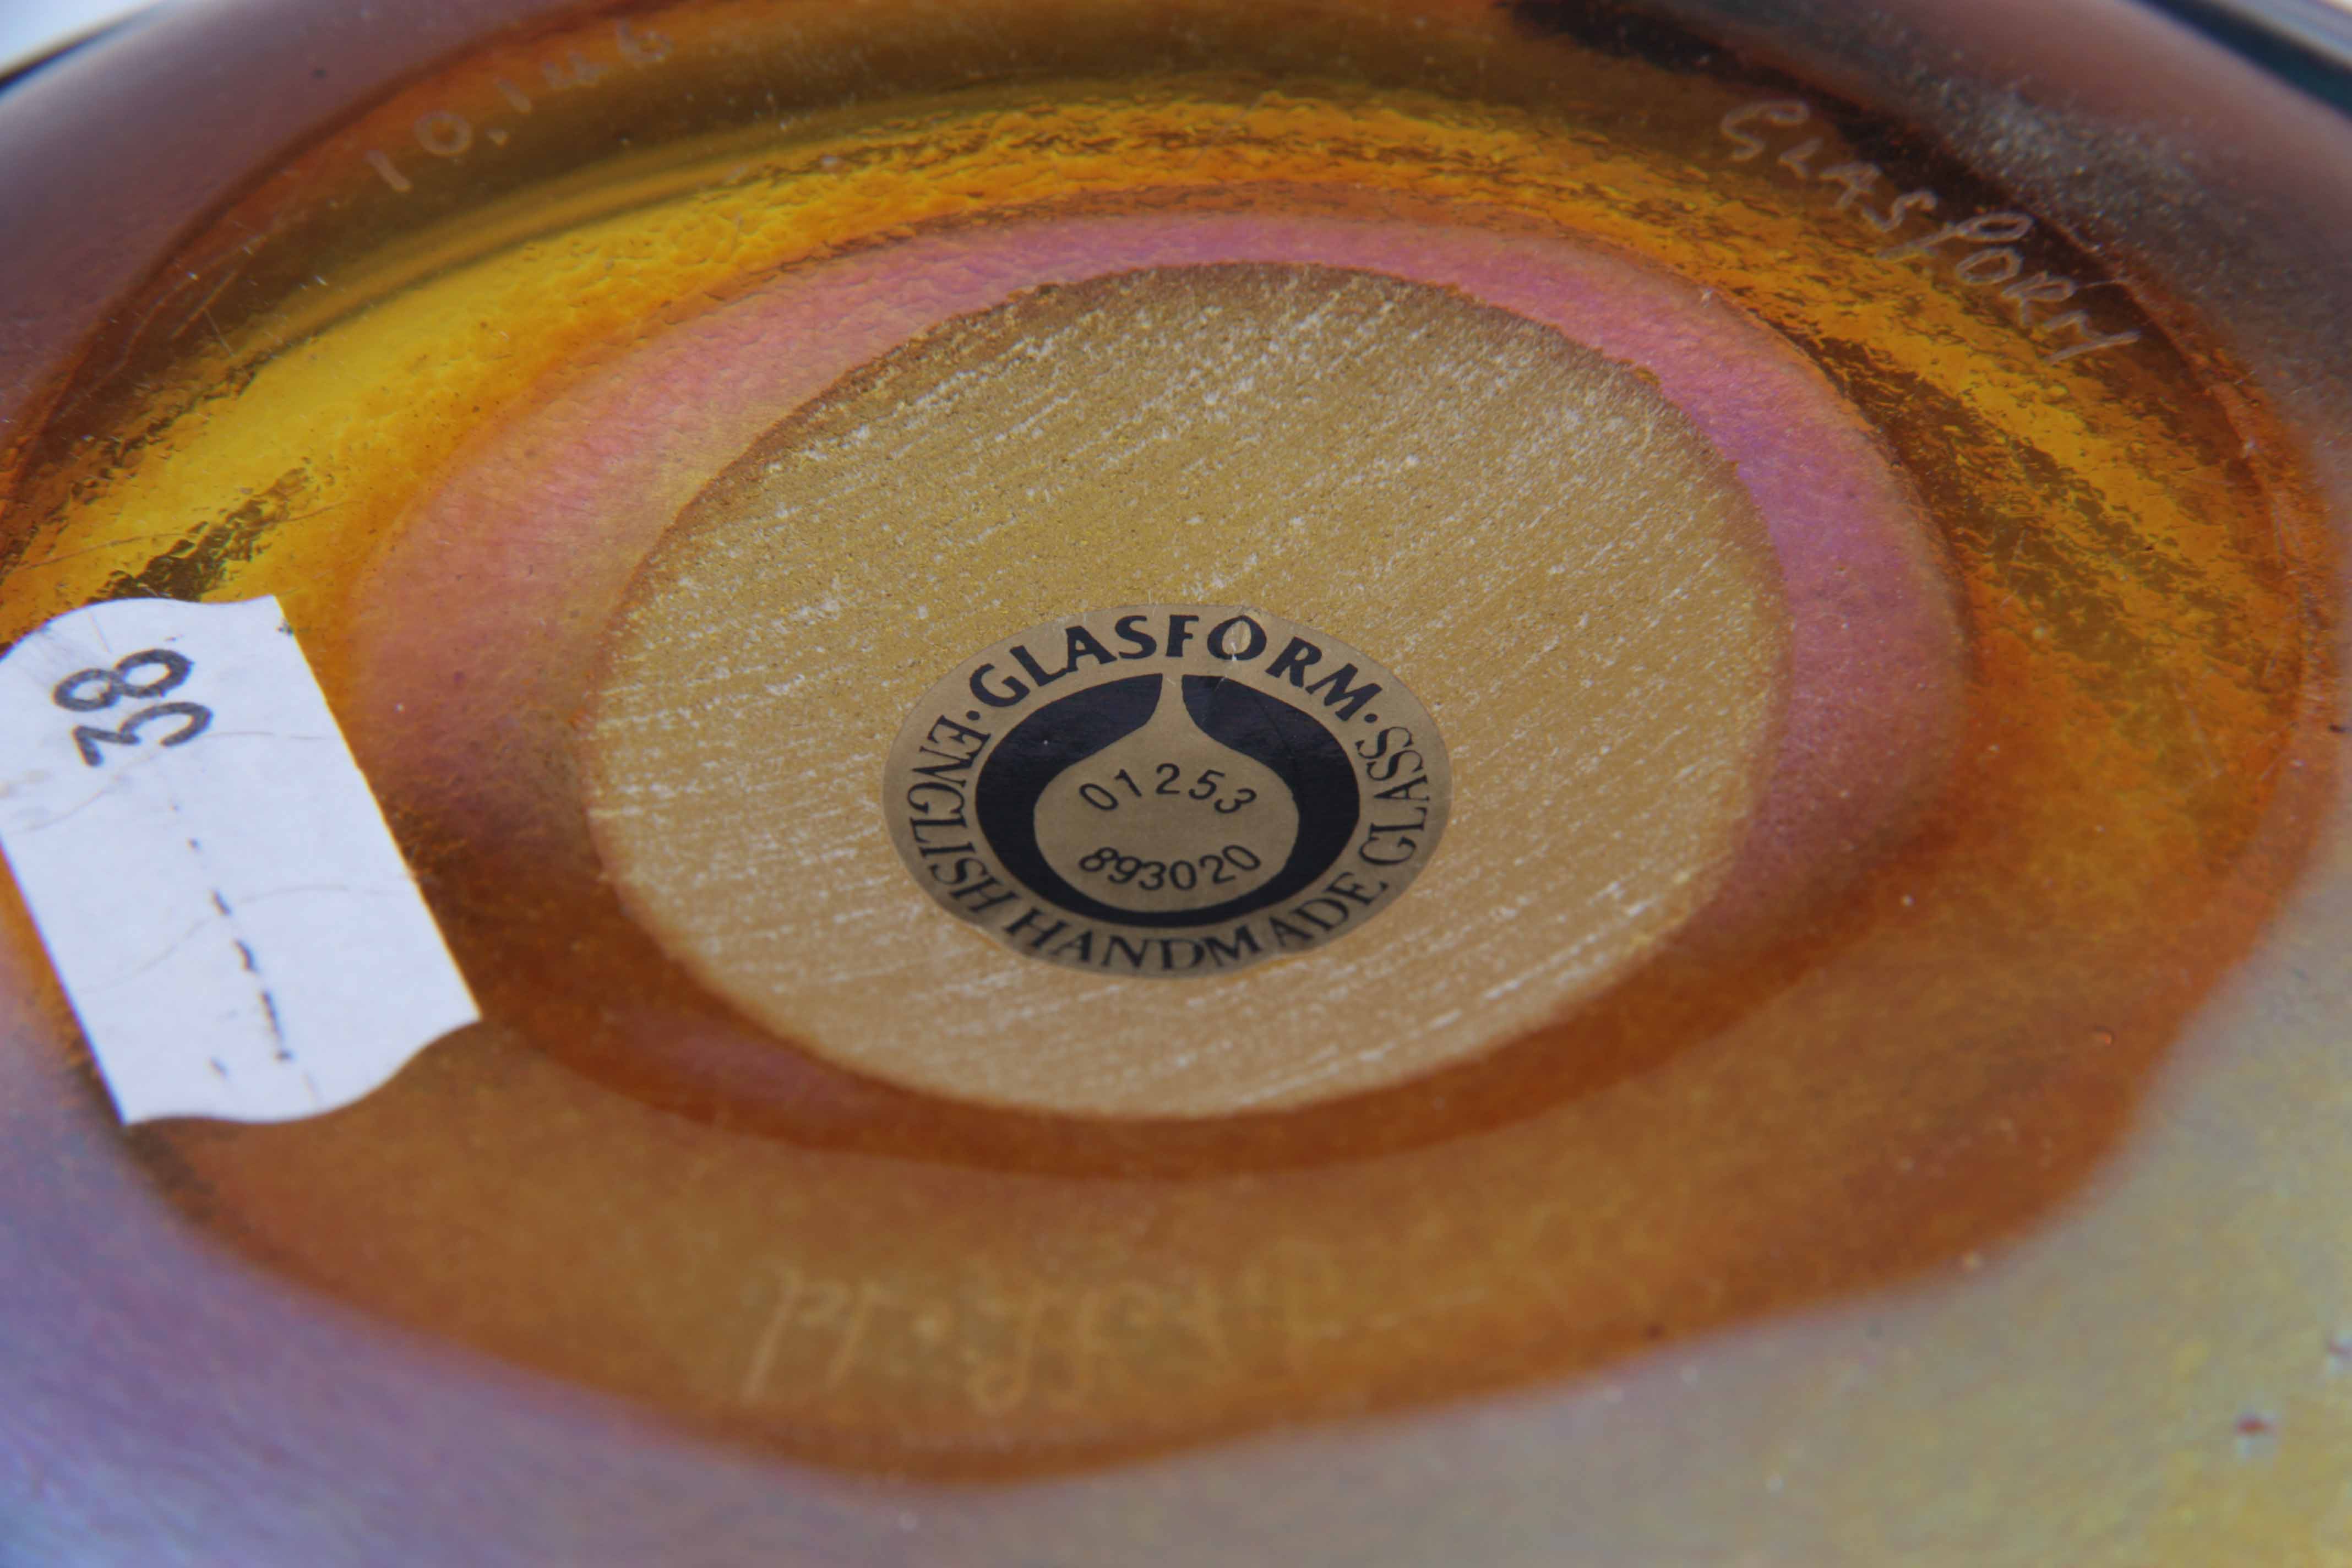 A LATE 20TH CENTURY JOHN DITCHFIELD GLASS FORM IRIDESCENT GLASS BOWL, signed and numbered, with - Image 3 of 6